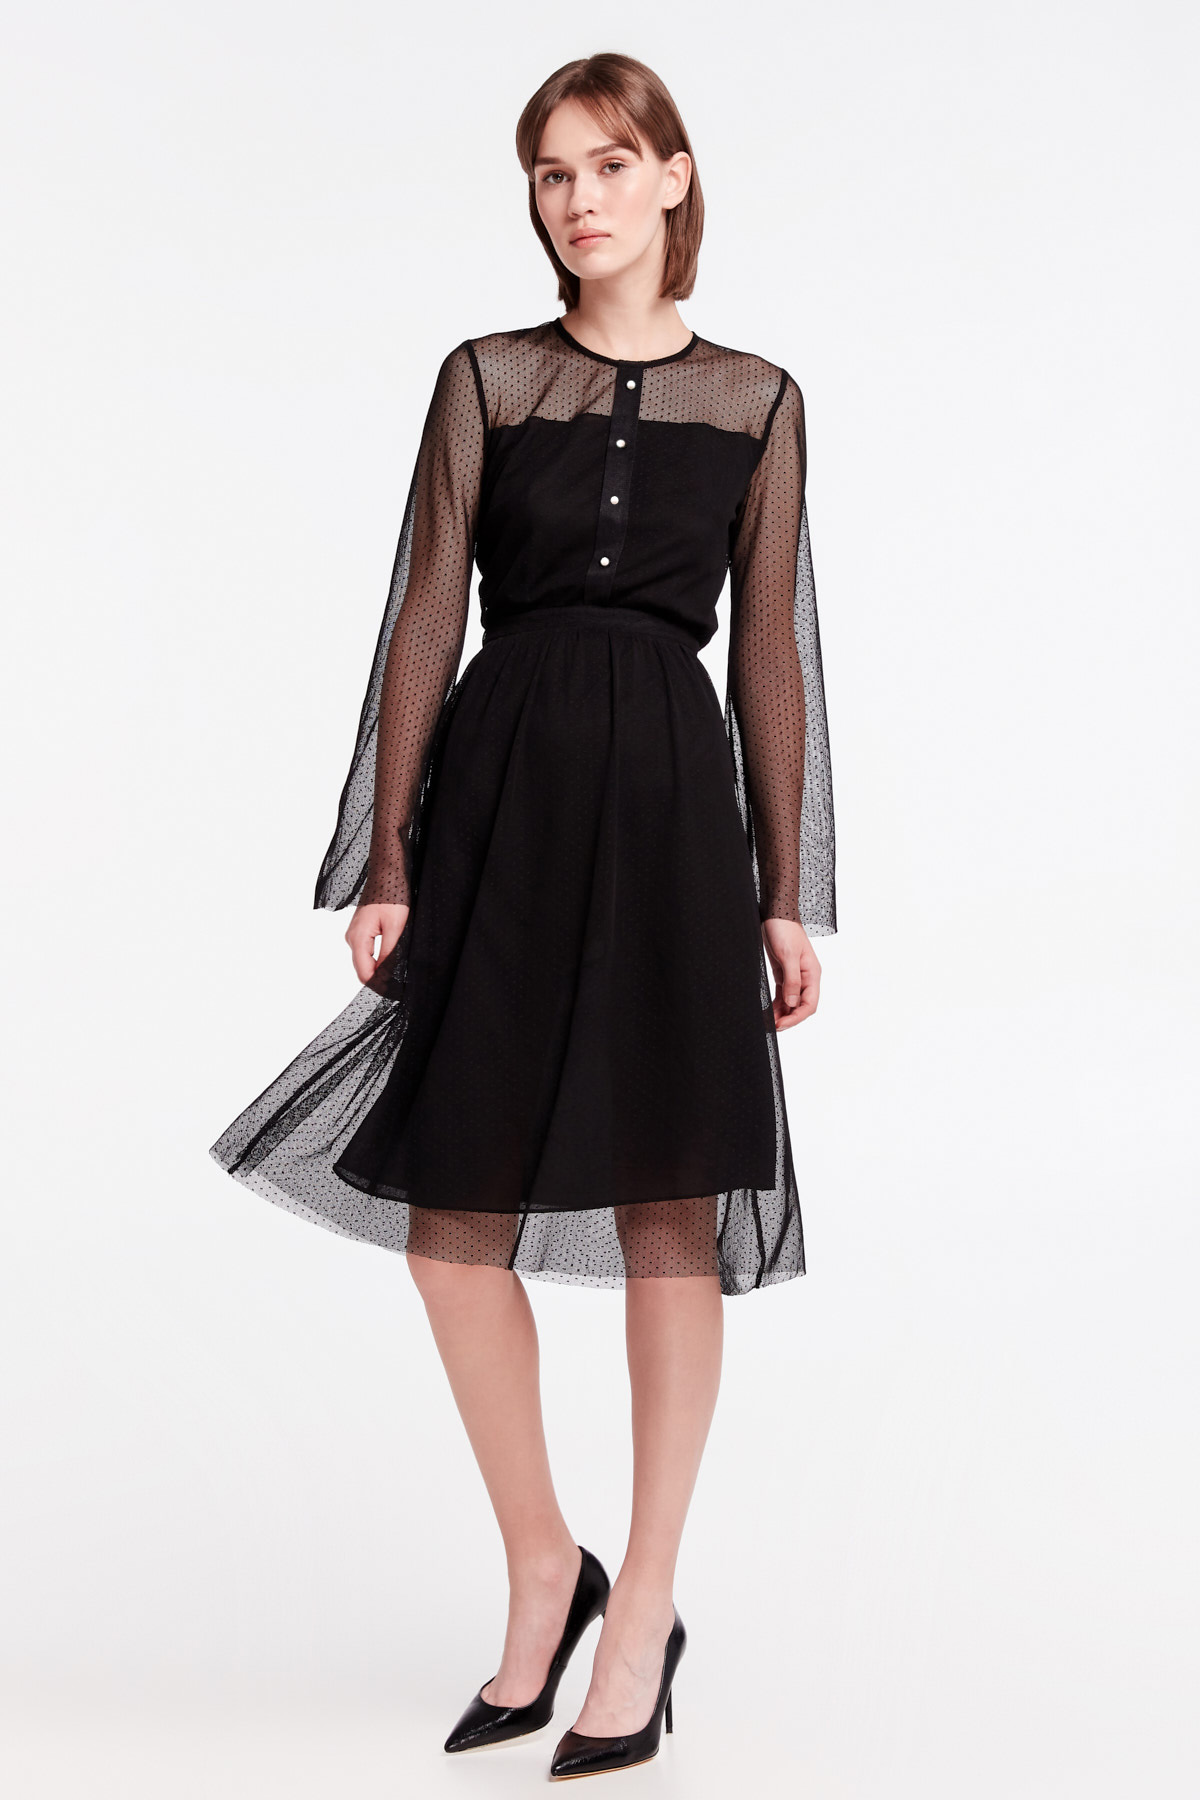 Black lace dress with buttons, photo 12